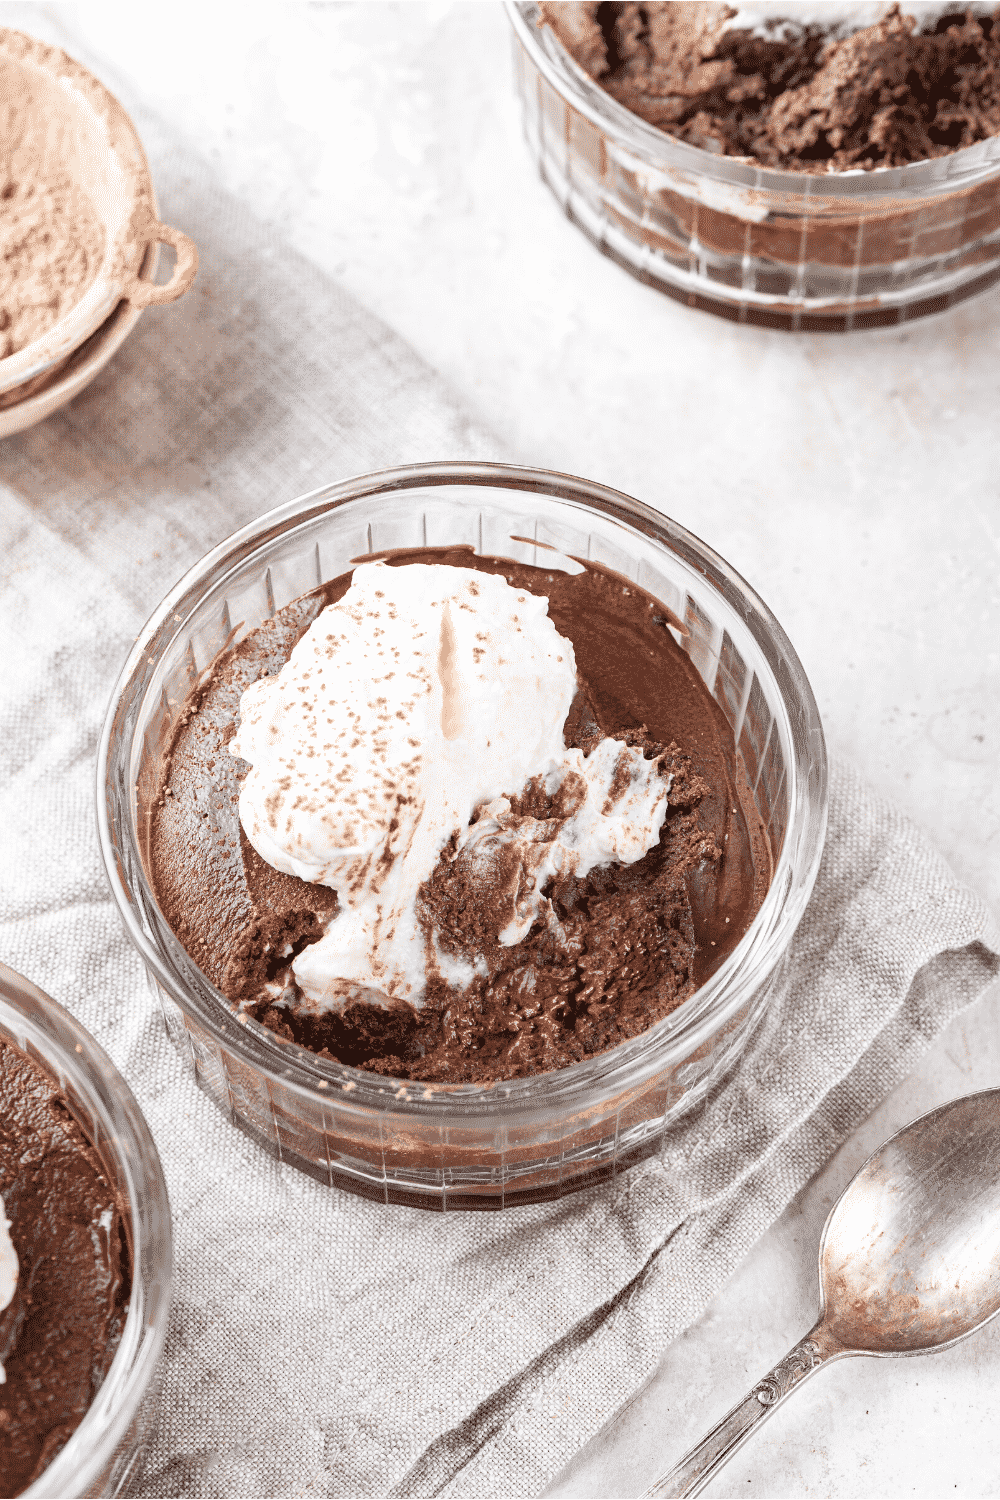 A glass bowl filled with keto chocolate mousse. Keto whipped cream is on top of the mousse and the glass bowl is on a grey tablecloth.